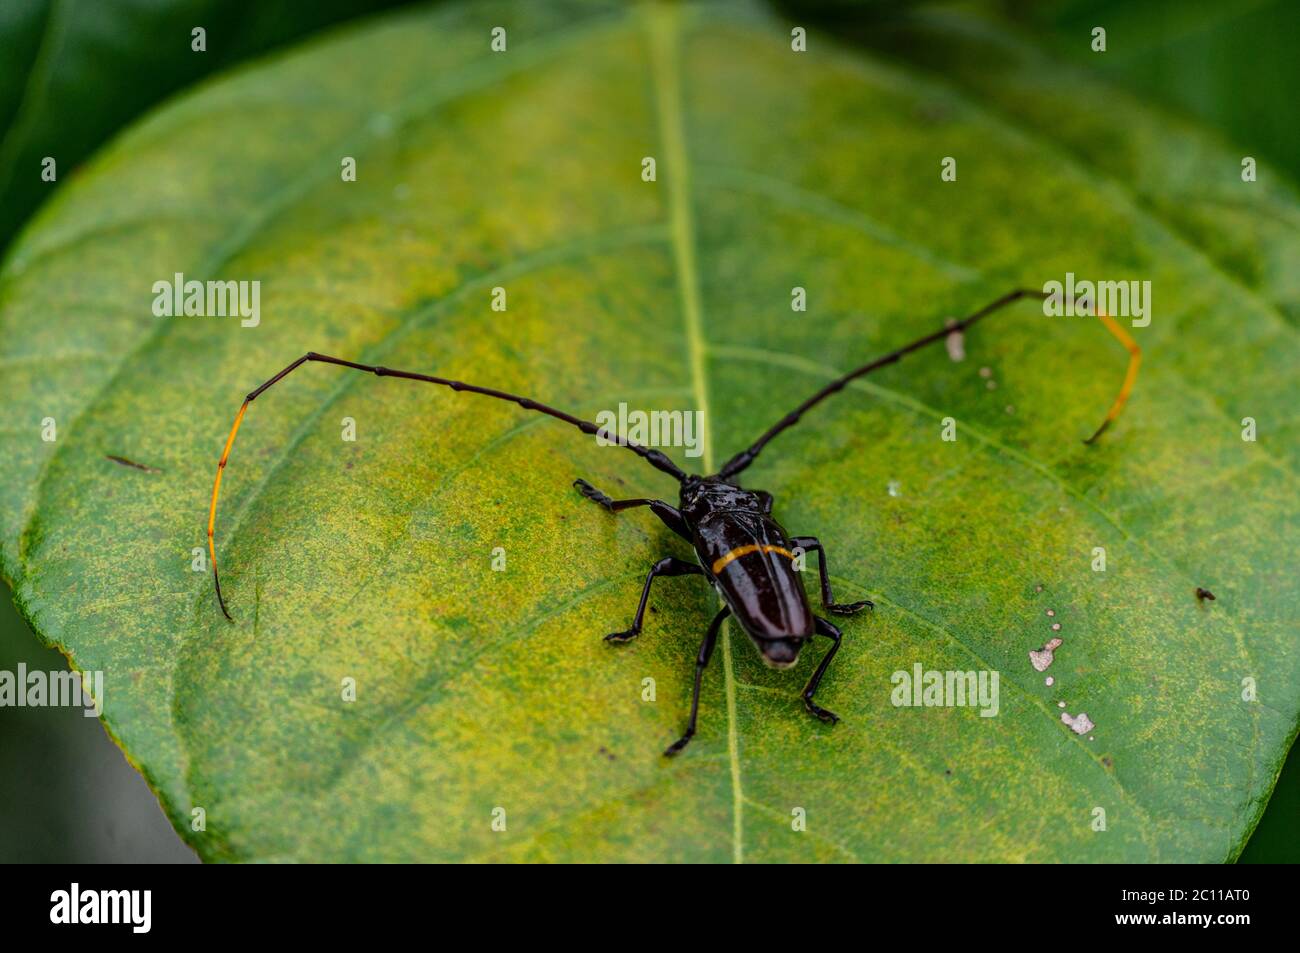 Close-up of a black bug with antenna on a leaf Stock Photo